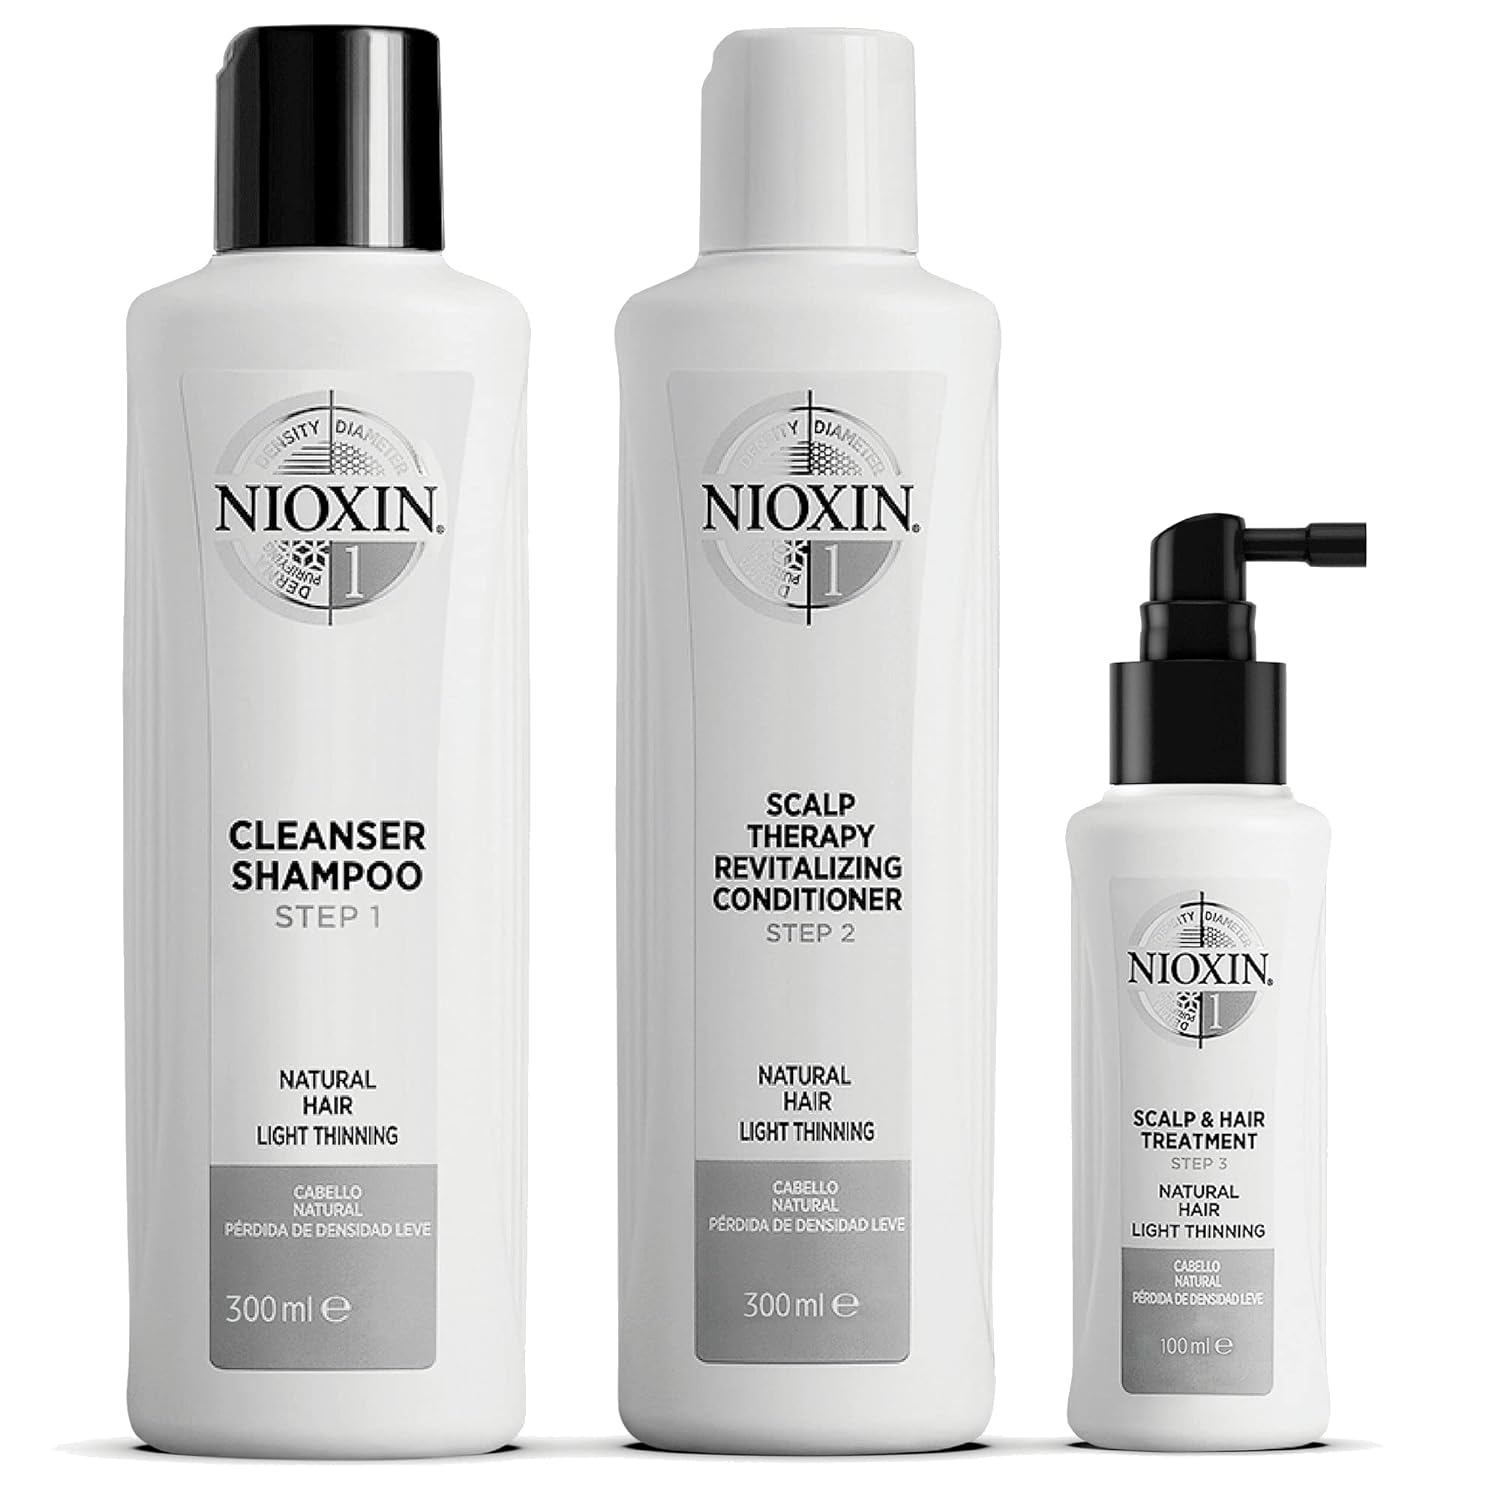 Nioxin System Kits, Cleanse, Condition, Hydrate Sensitive or Dry Scalp